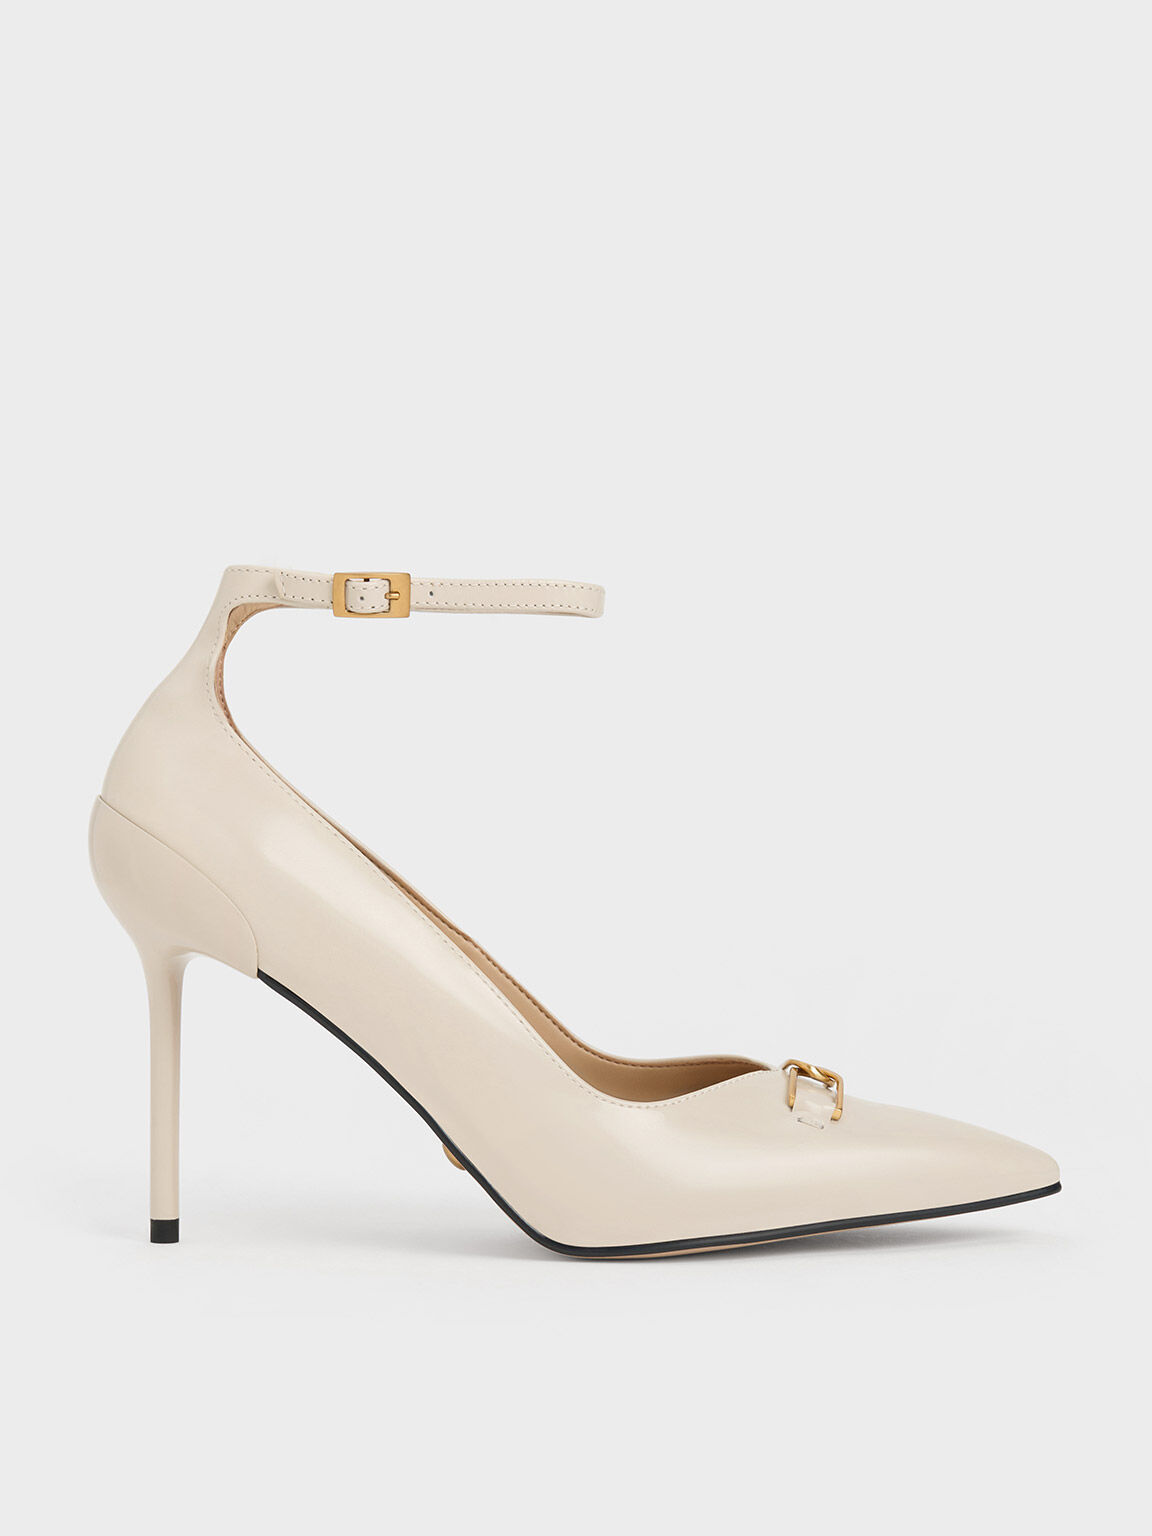 Women's Pumps | Shop Exclusive Styles | CHARLES & KEITH US